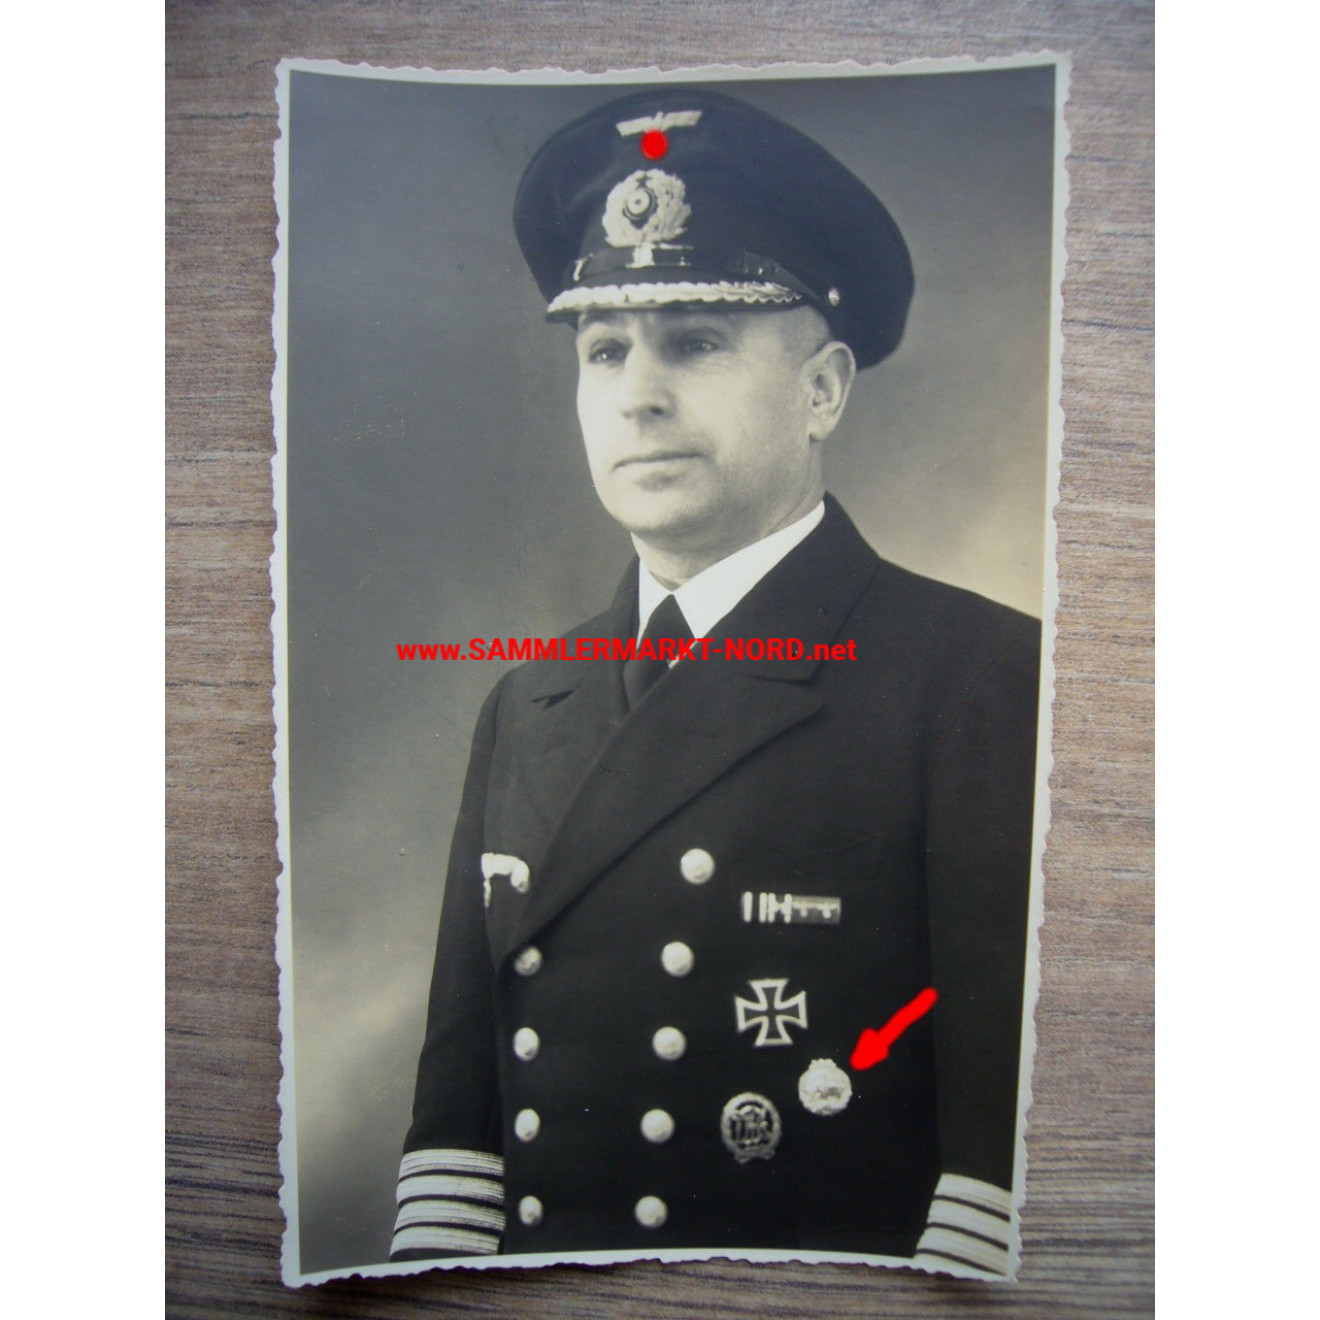 Kriegsmarine Officer of the Barrage Weapons with Colonial Badge Order of the Elephant